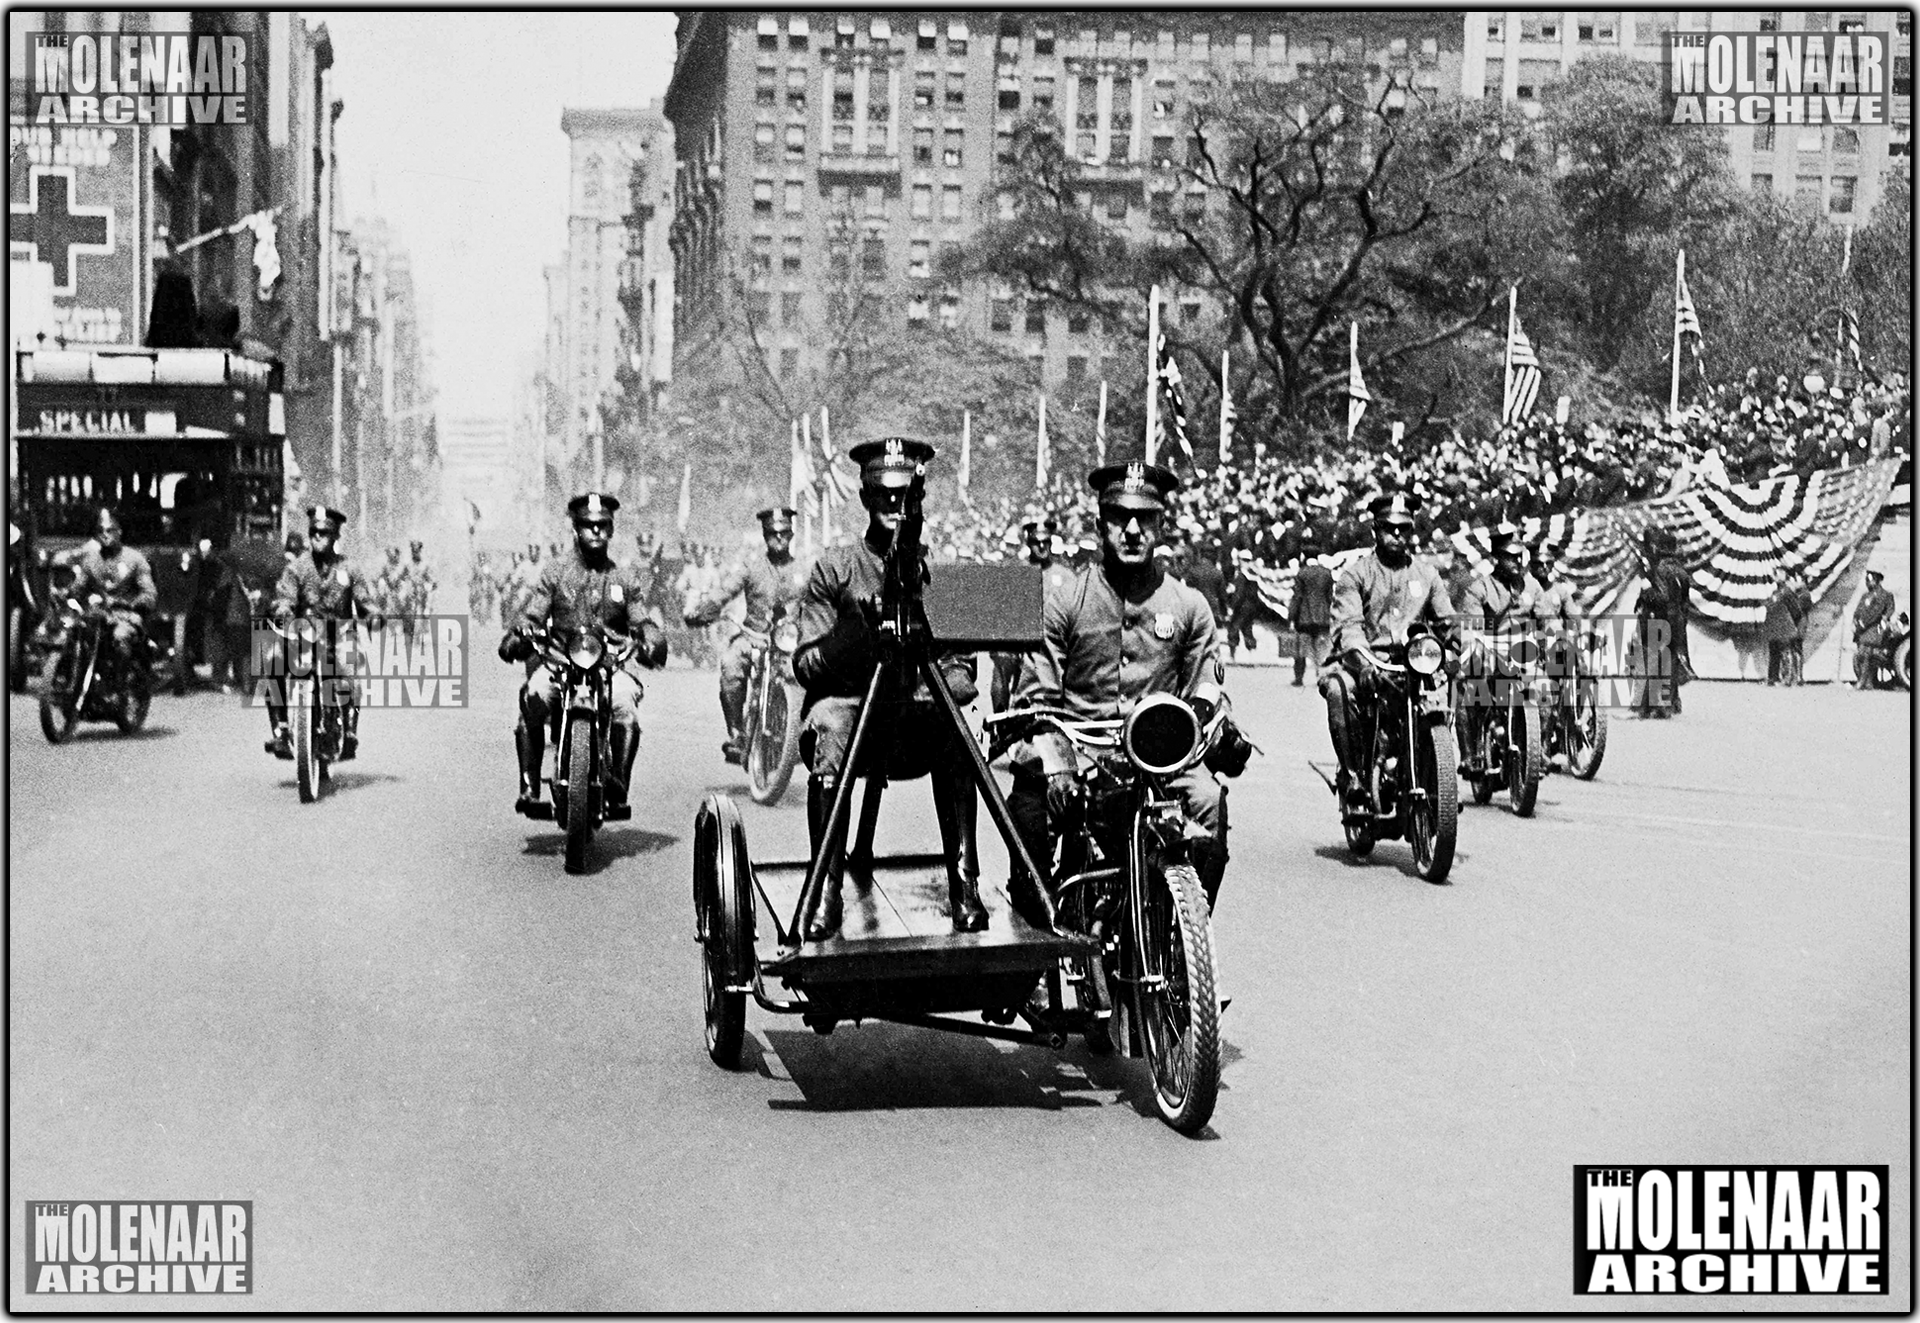 Vintage Indian Motocycle Military PHOTO - 1918 New York Annual Police Parade